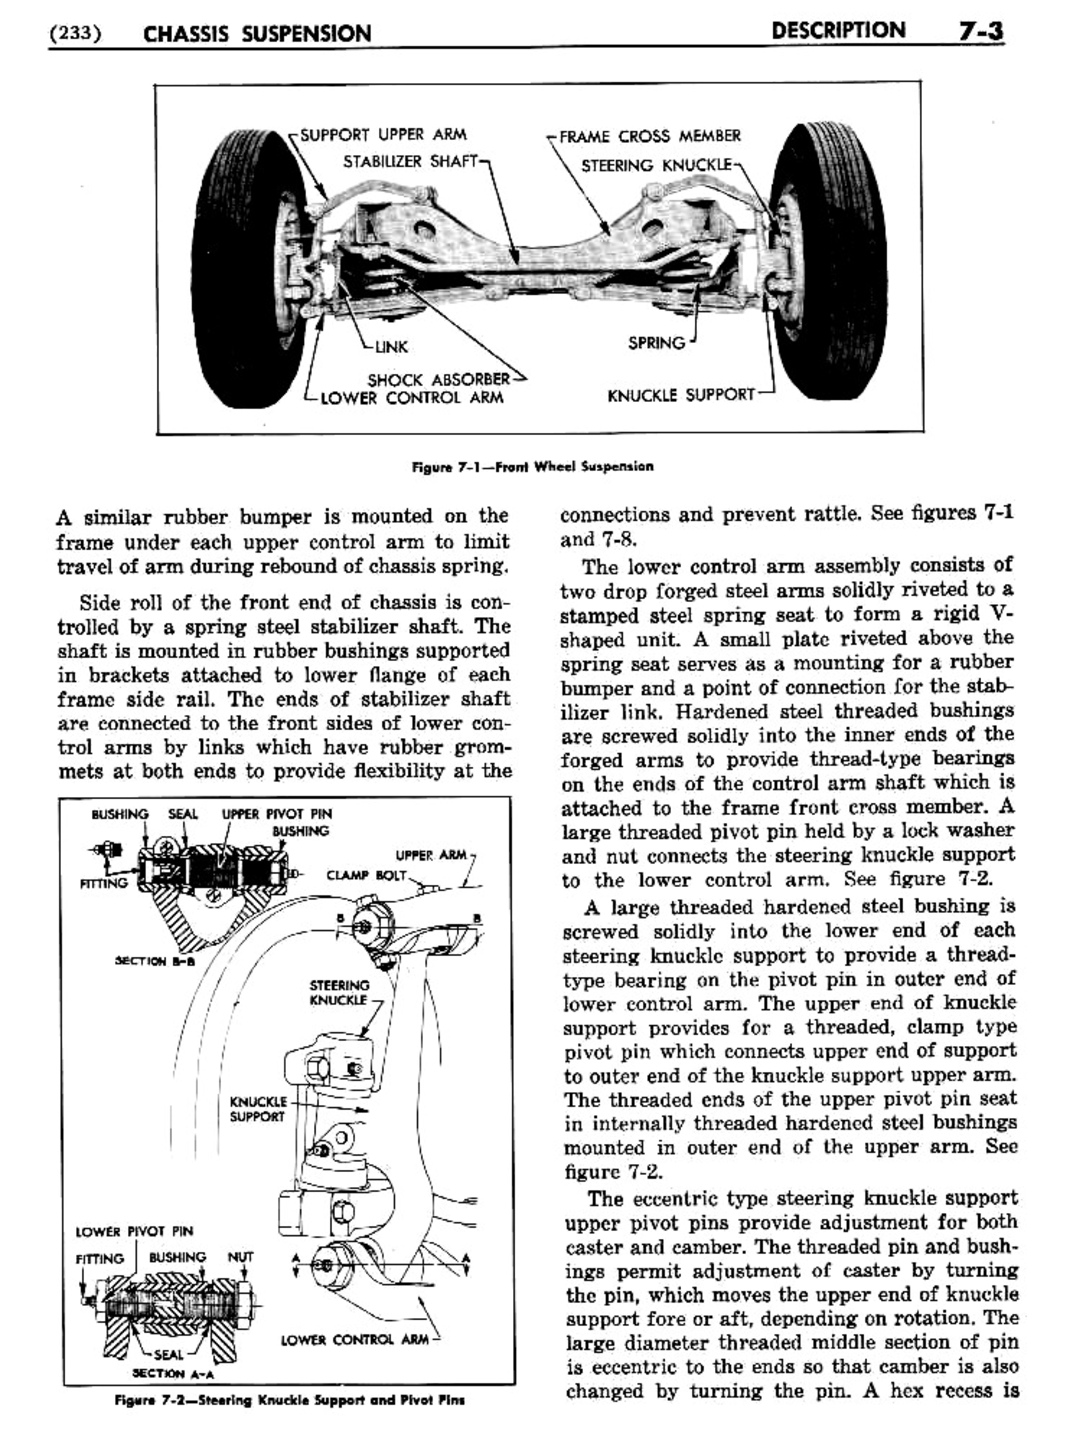 n_08 1954 Buick Shop Manual - Chassis Suspension-003-003.jpg